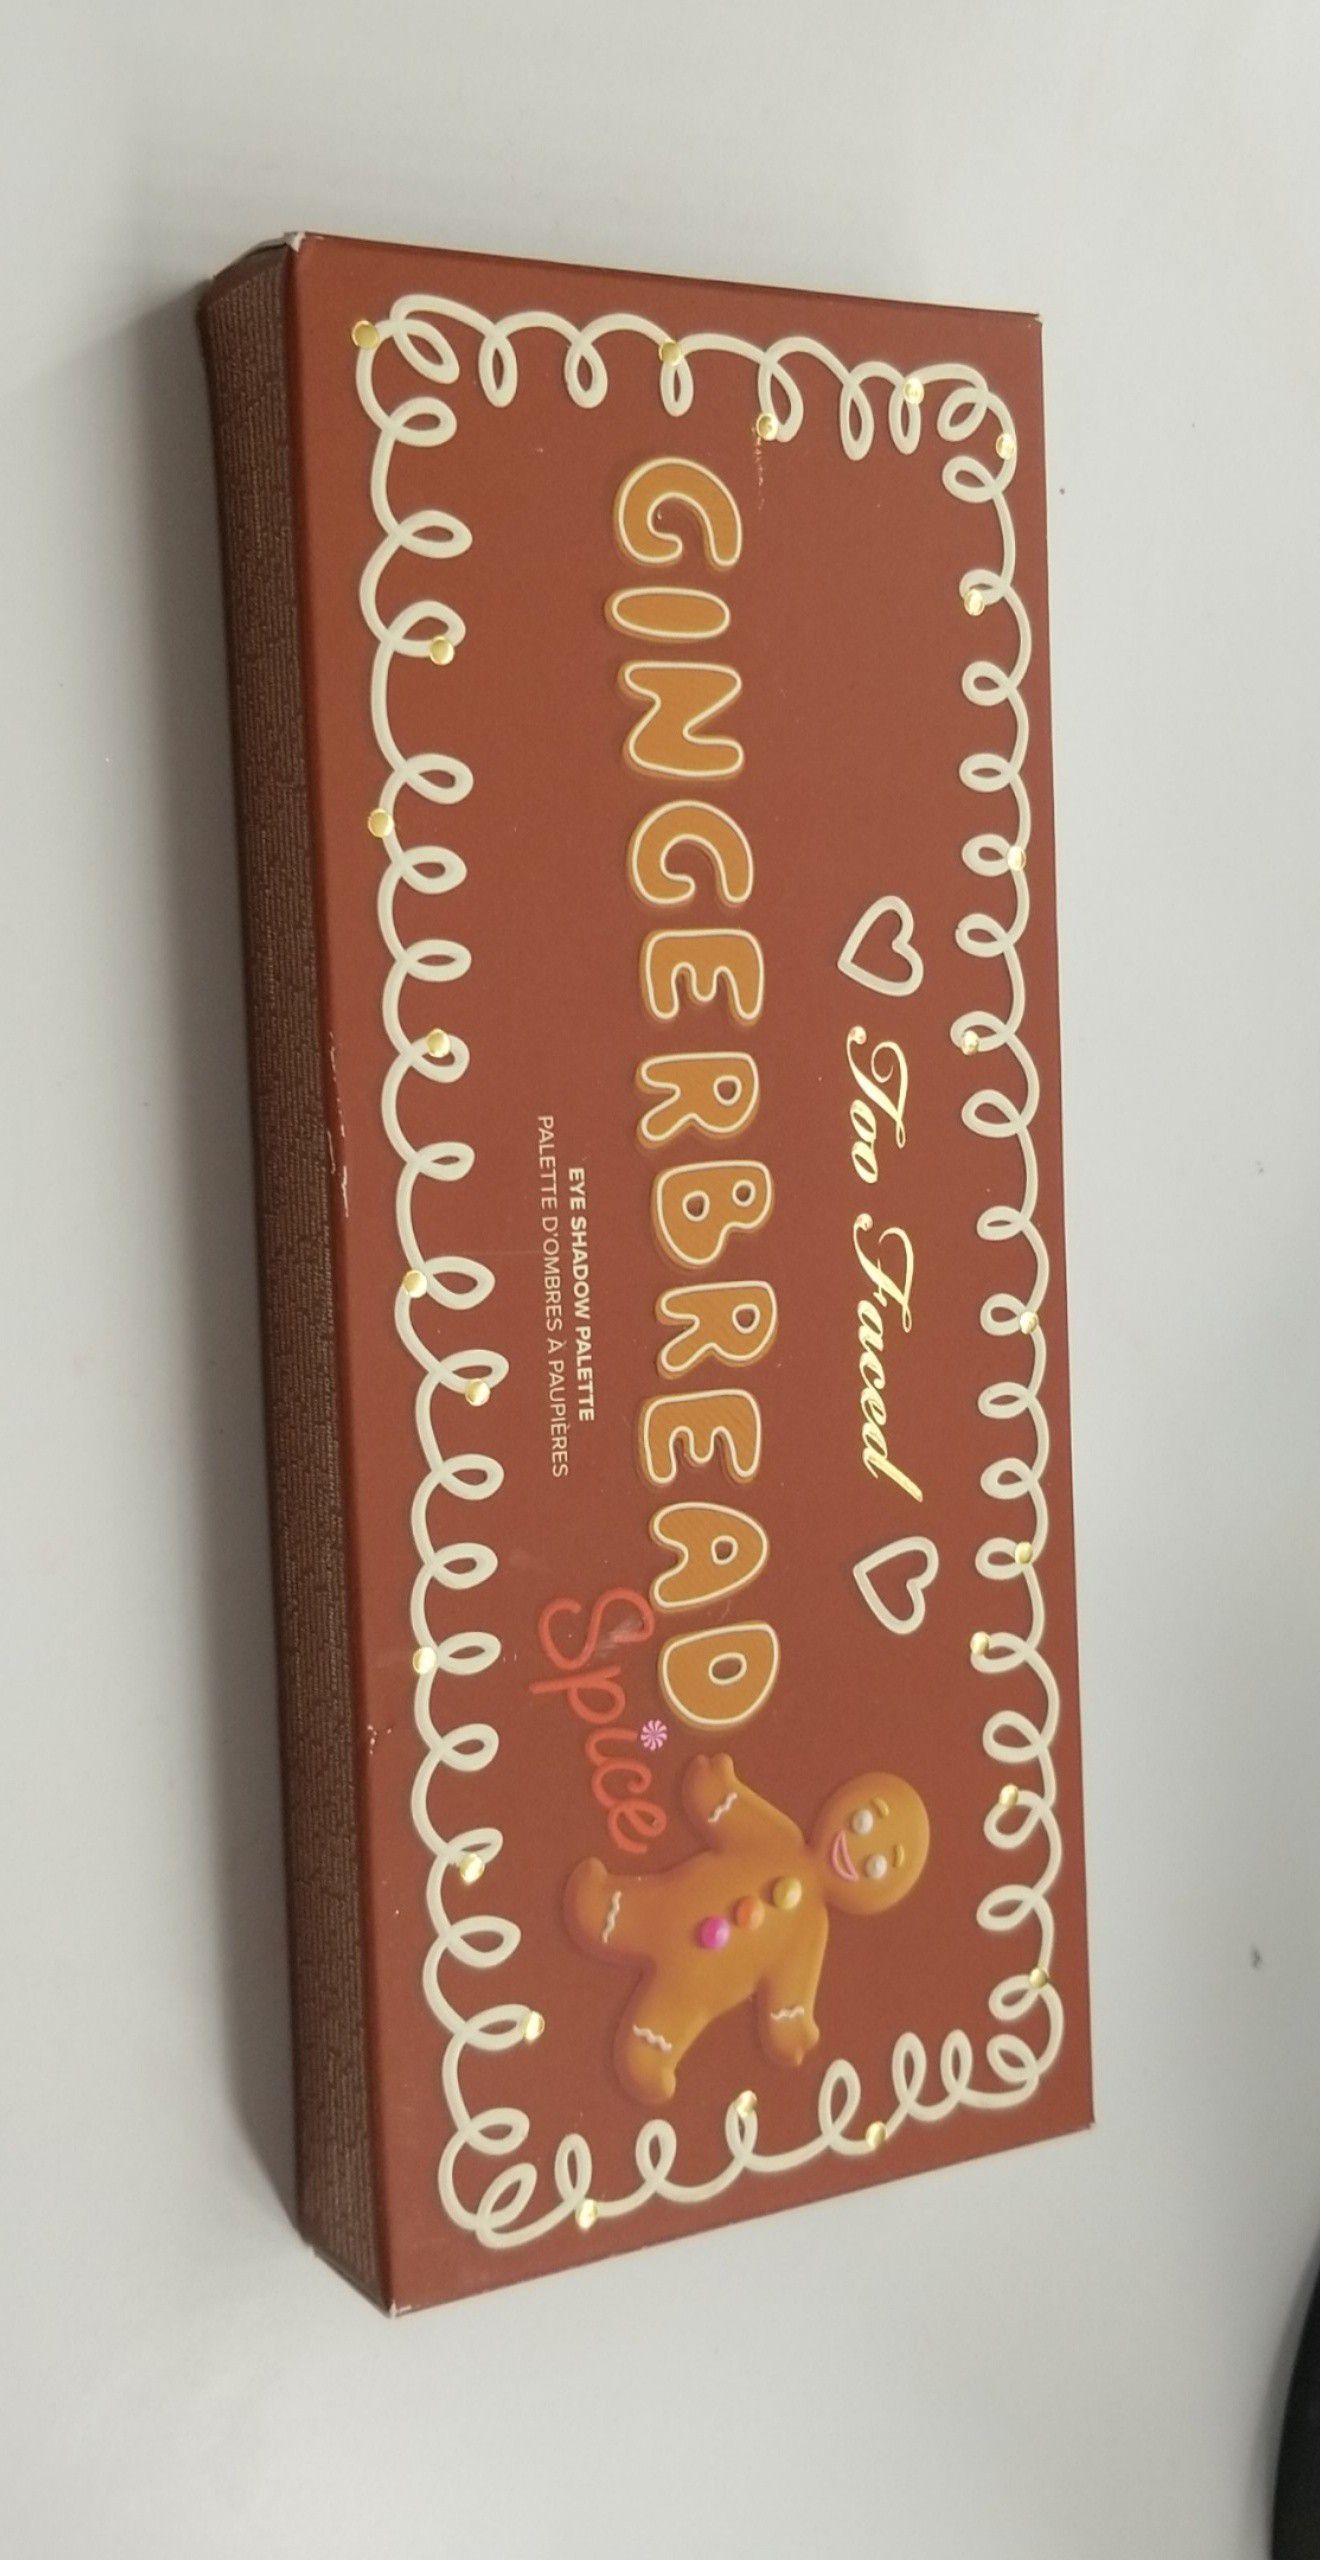 Too faced Gingerbread spice